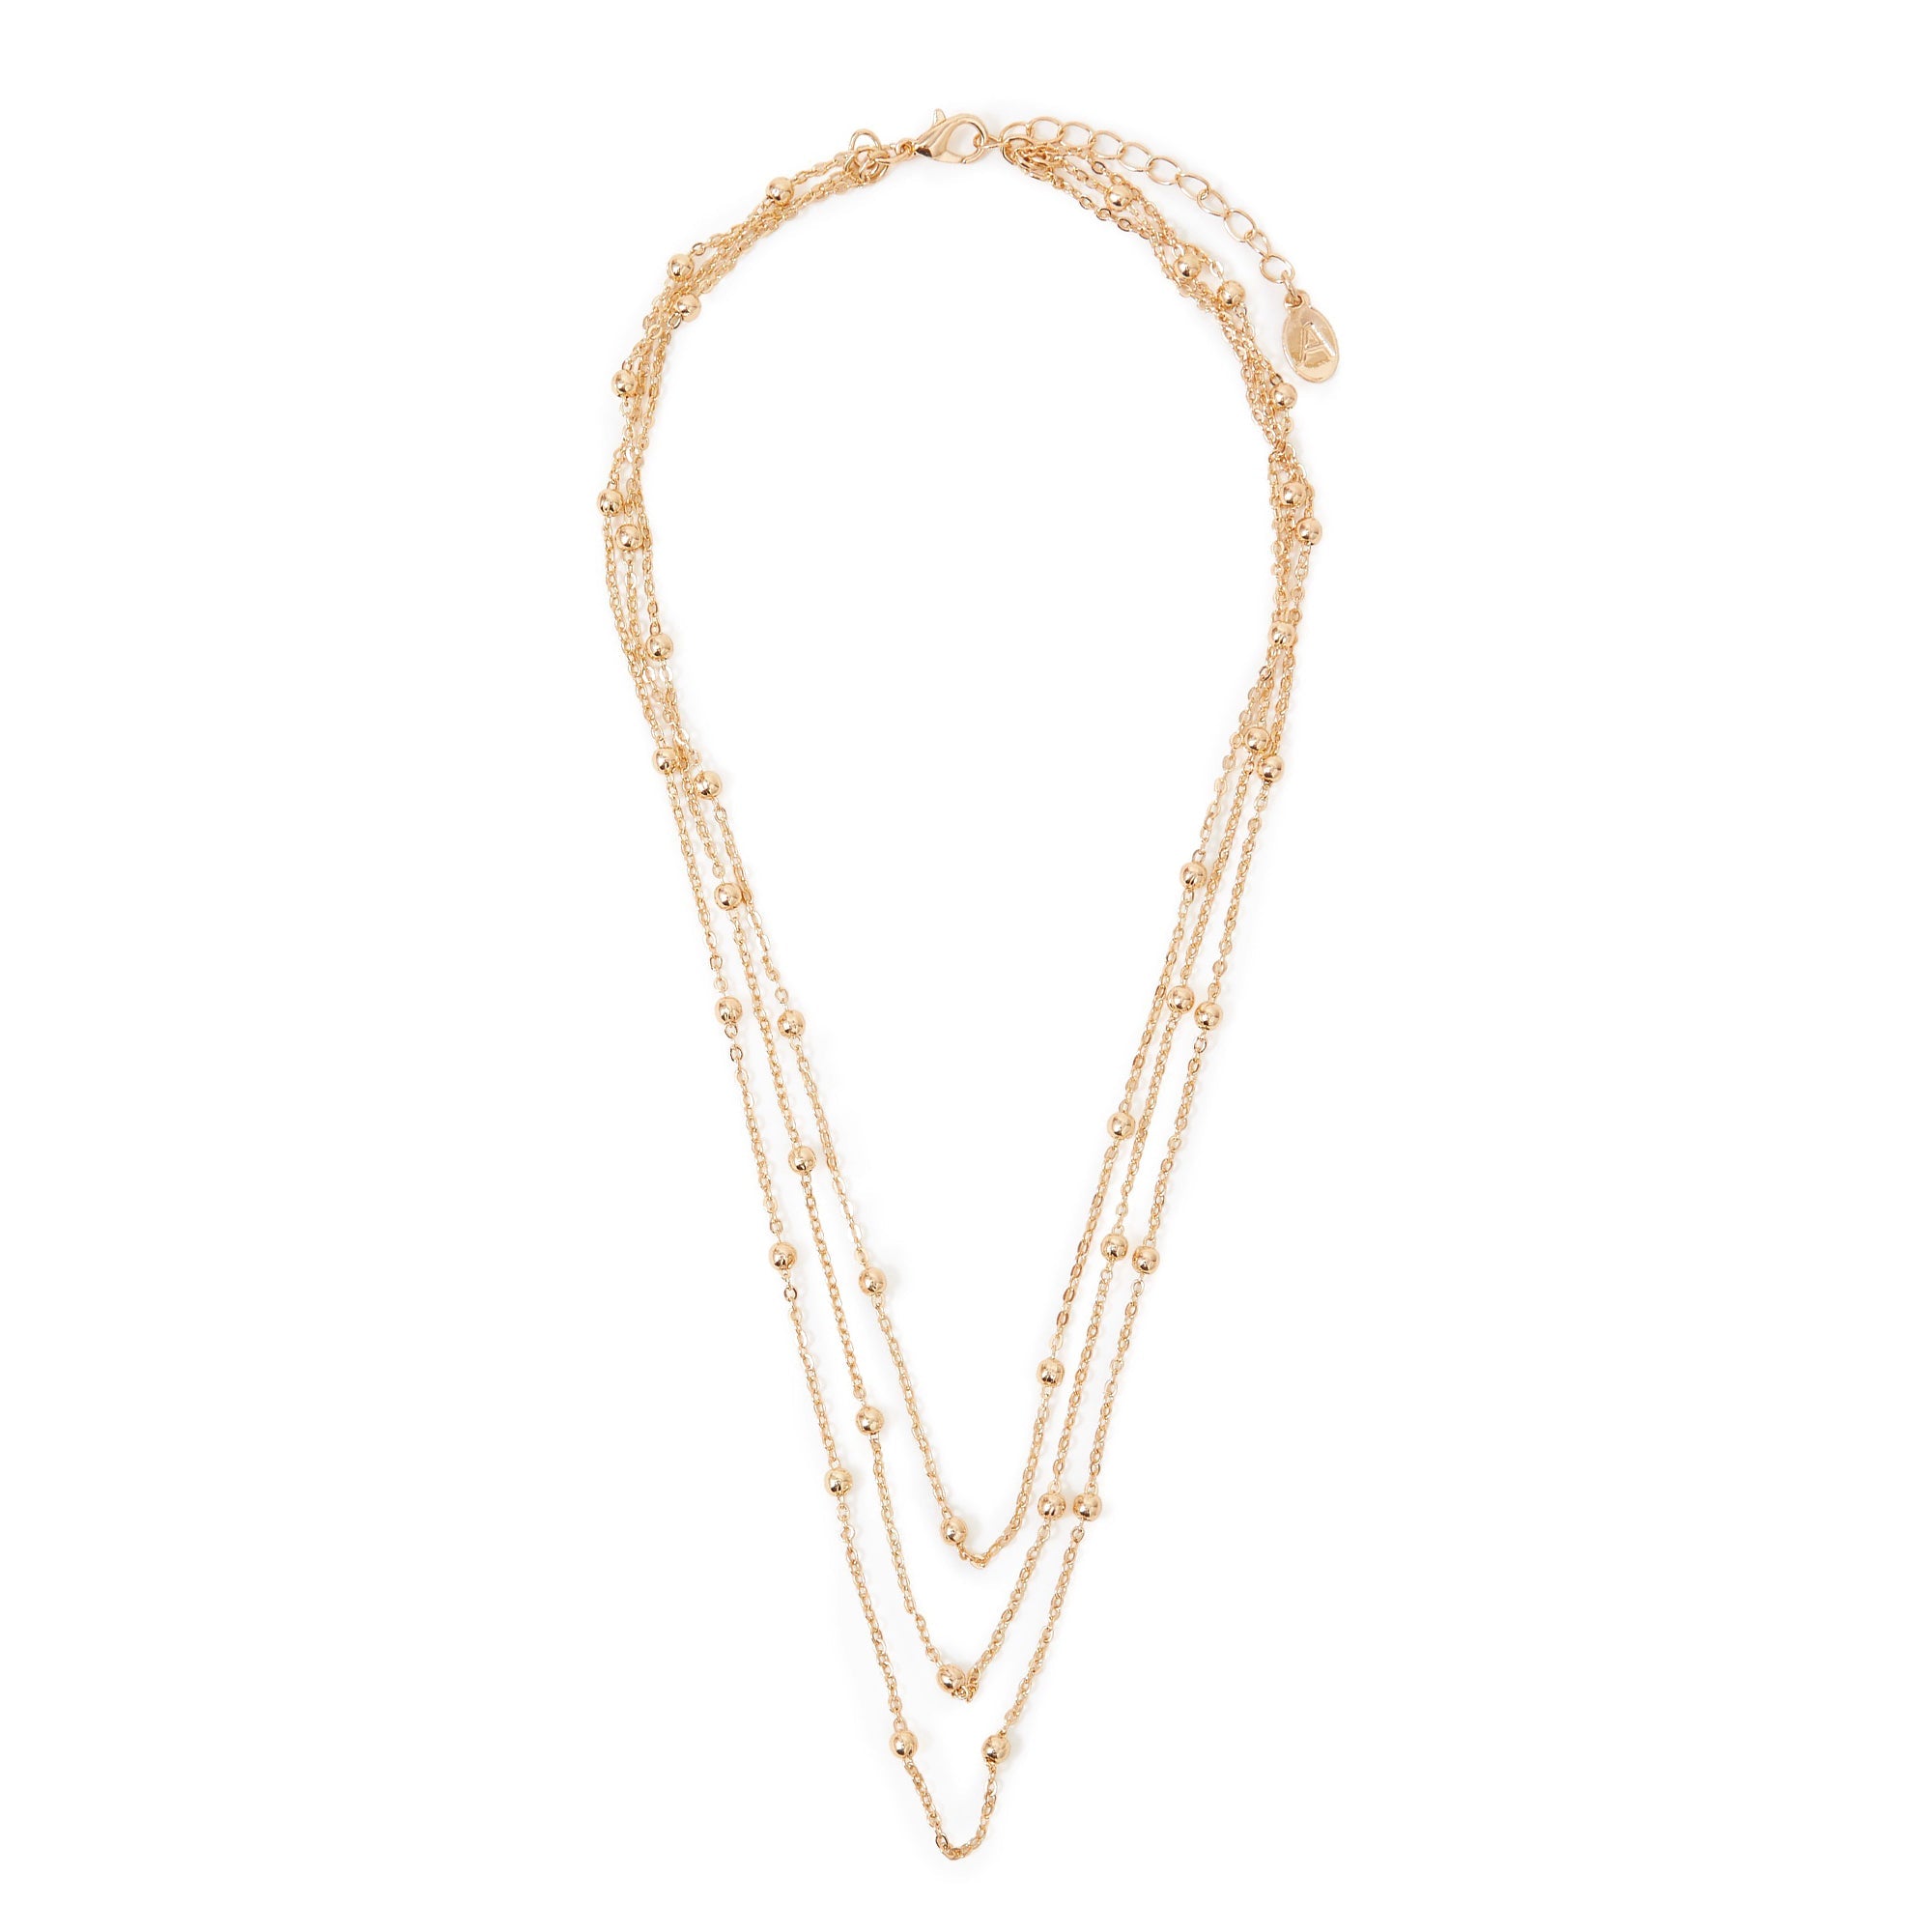 Accessorize London Women's Gold Layered Station Bead Necklace